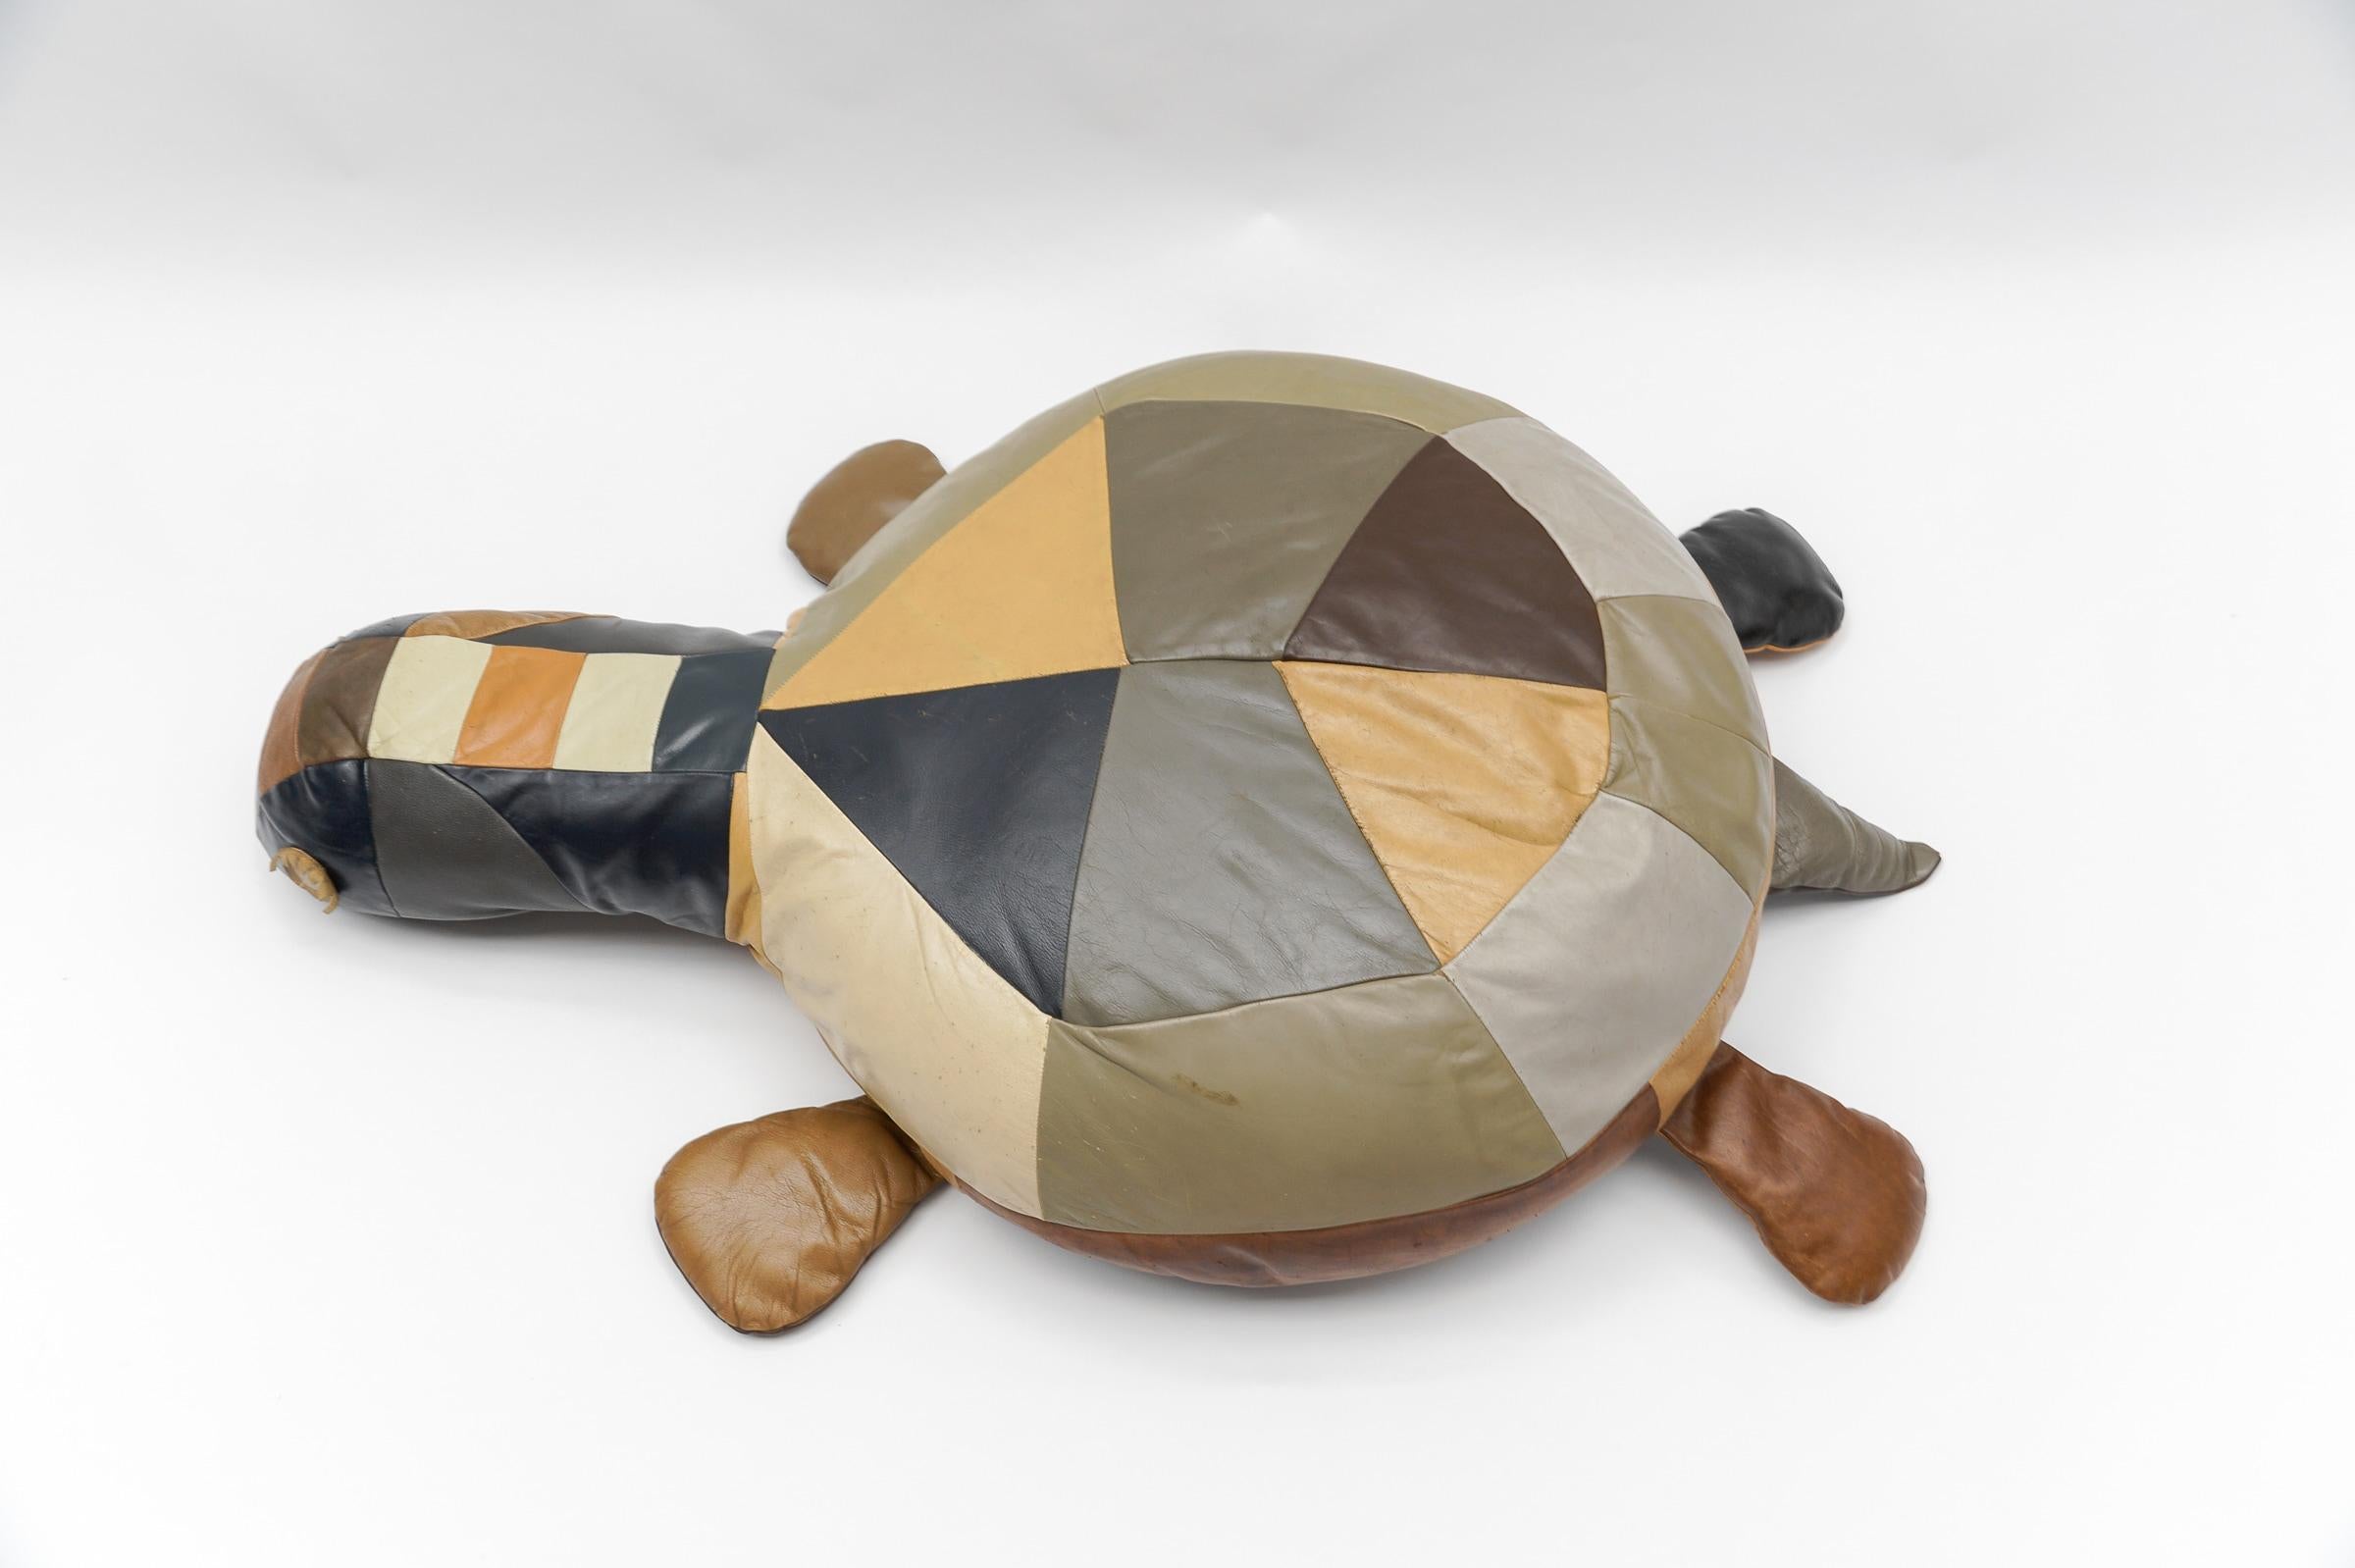 Set of 3 Leather Patchwork Turtle Poufs - Mid-Century Modern, Switzerland, 1960s For Sale 3